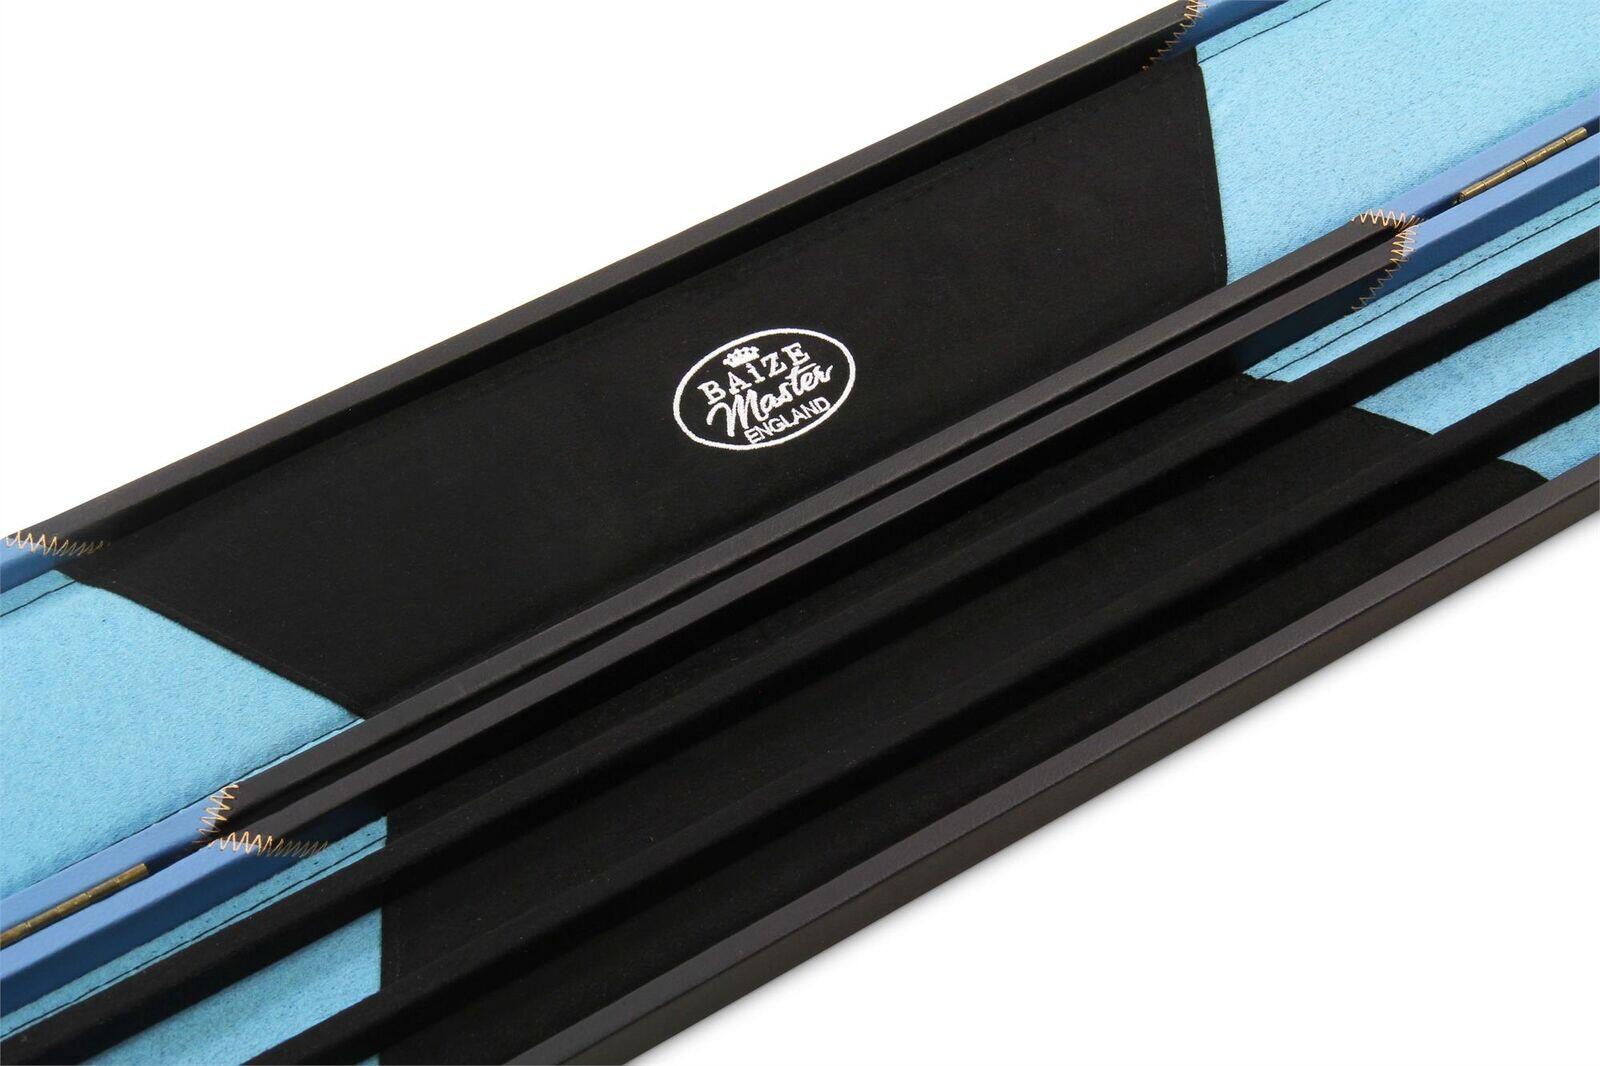 Baize Master 1 Piece WIDE SKY BLUE ARROW Snooker Pool Cue Case - Holds 3 Cues 7/7